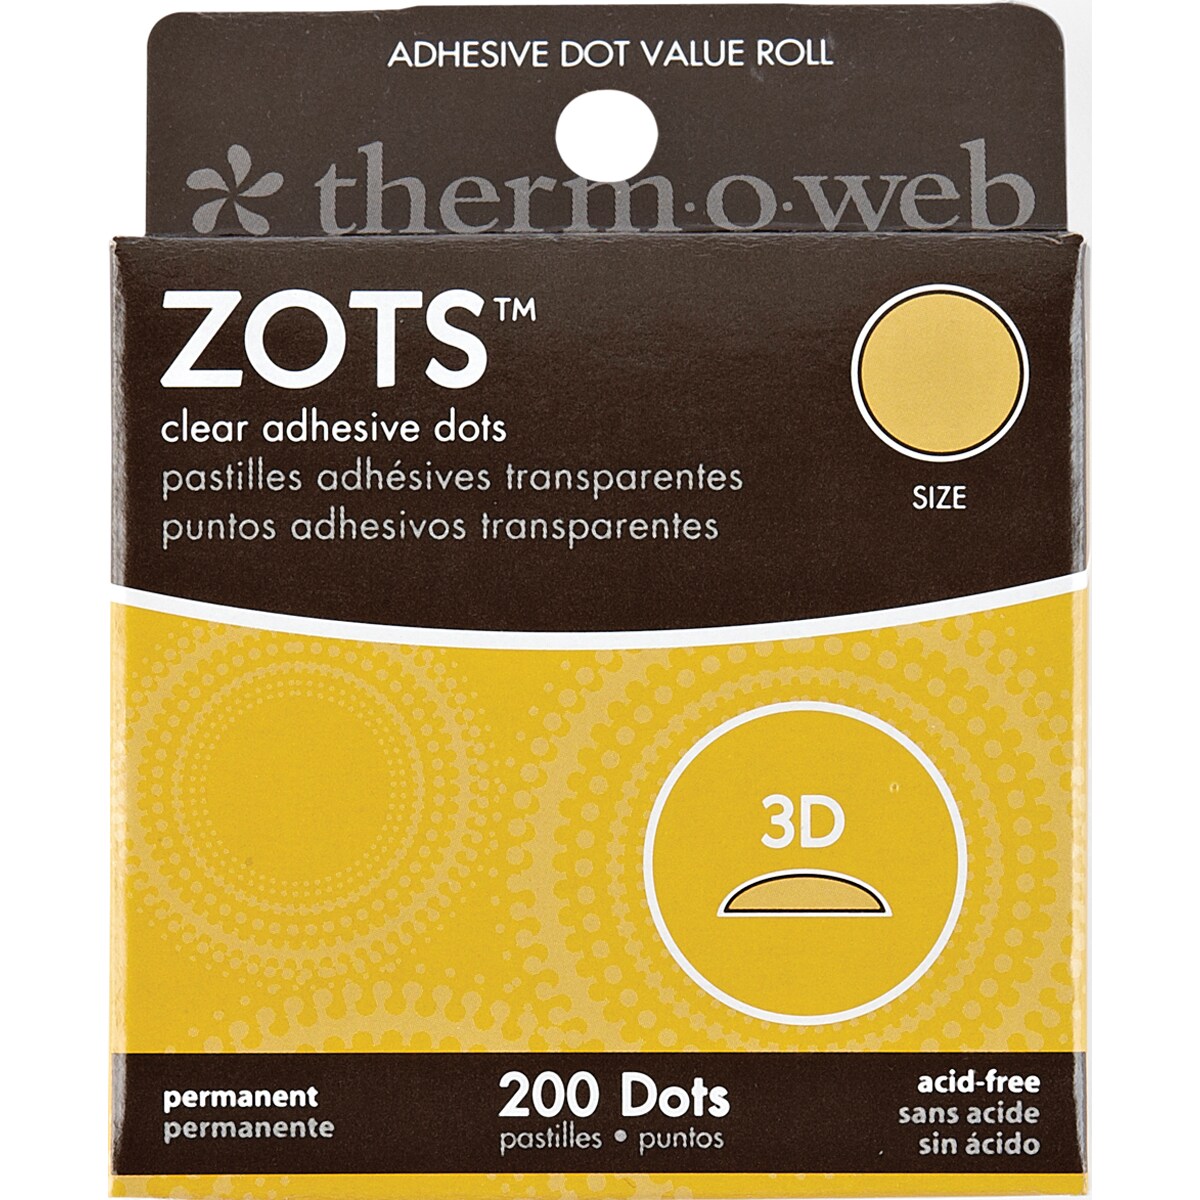 Zots Adhesive Dots 3D .5In Diam .125 Thick 200Ct Roll - image 2 of 2